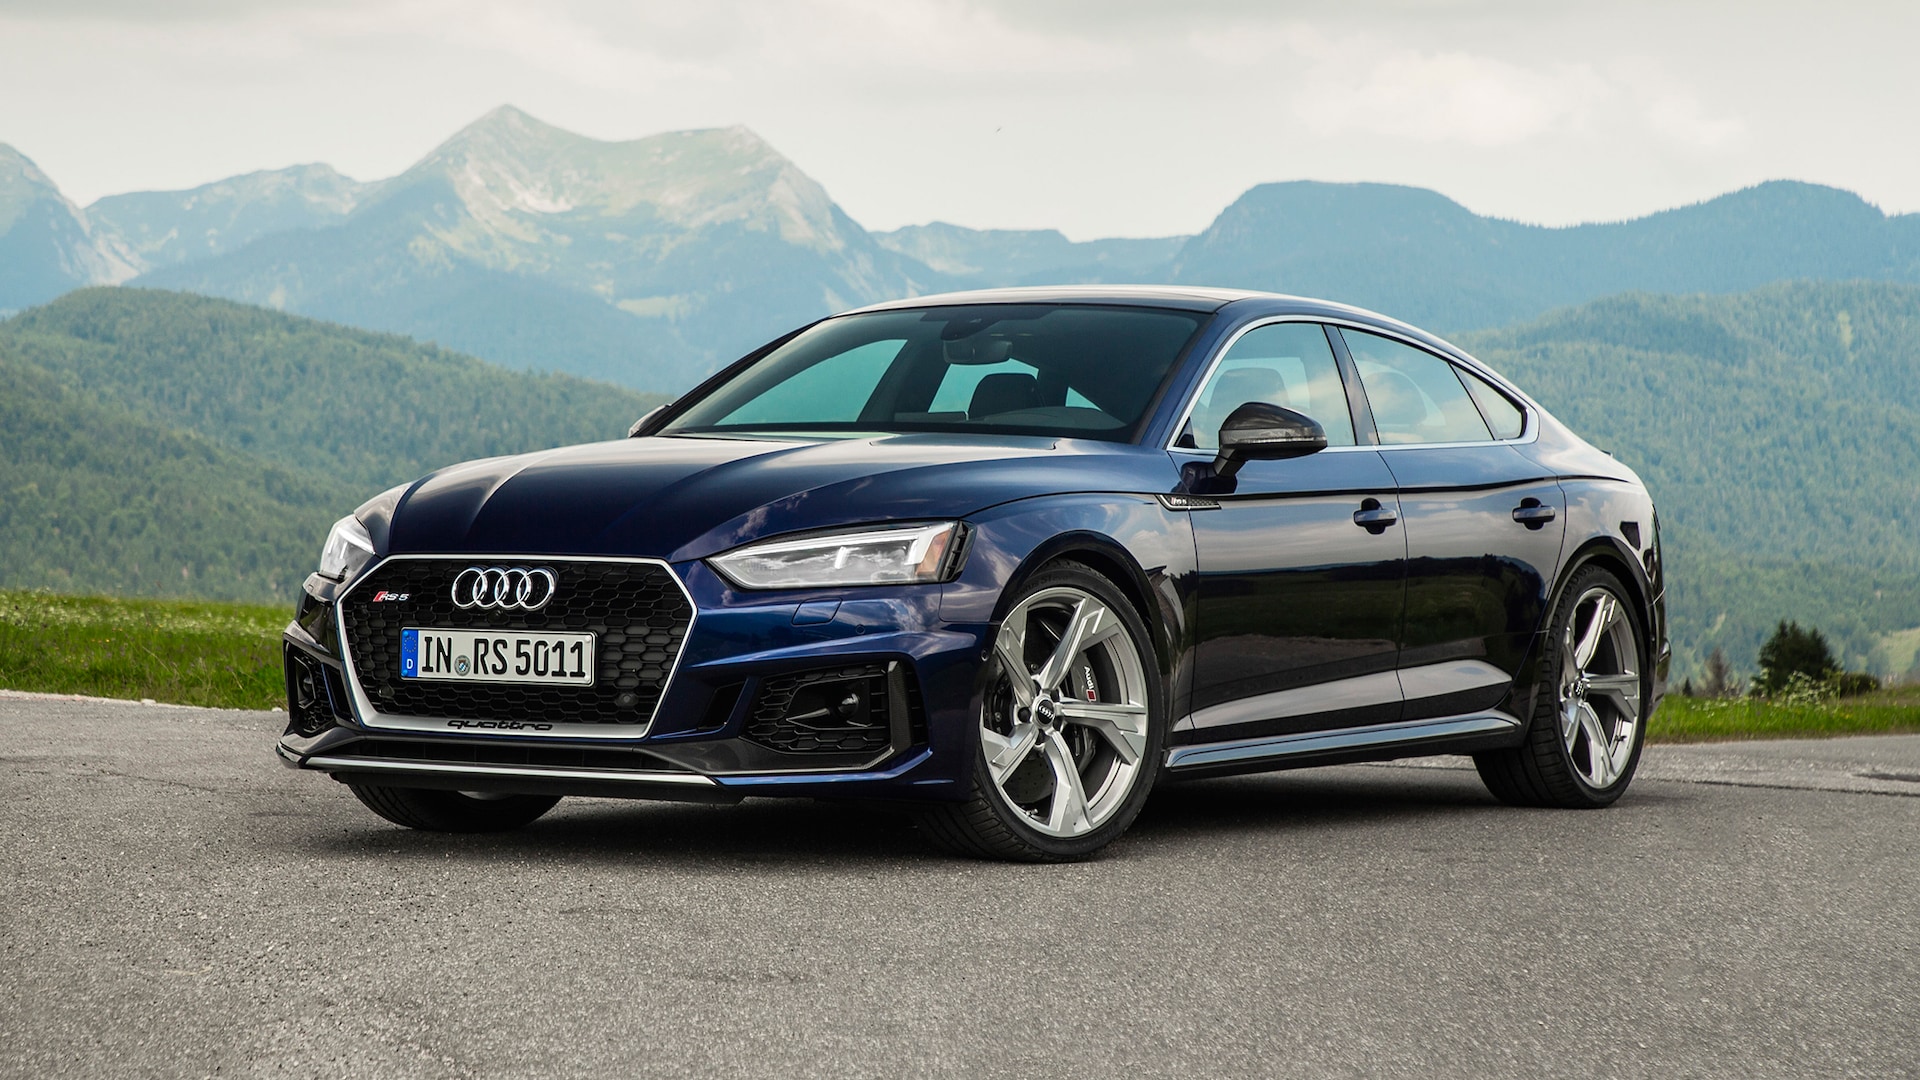 2019 Audi RS 5 Sportback Review: Practical Performance